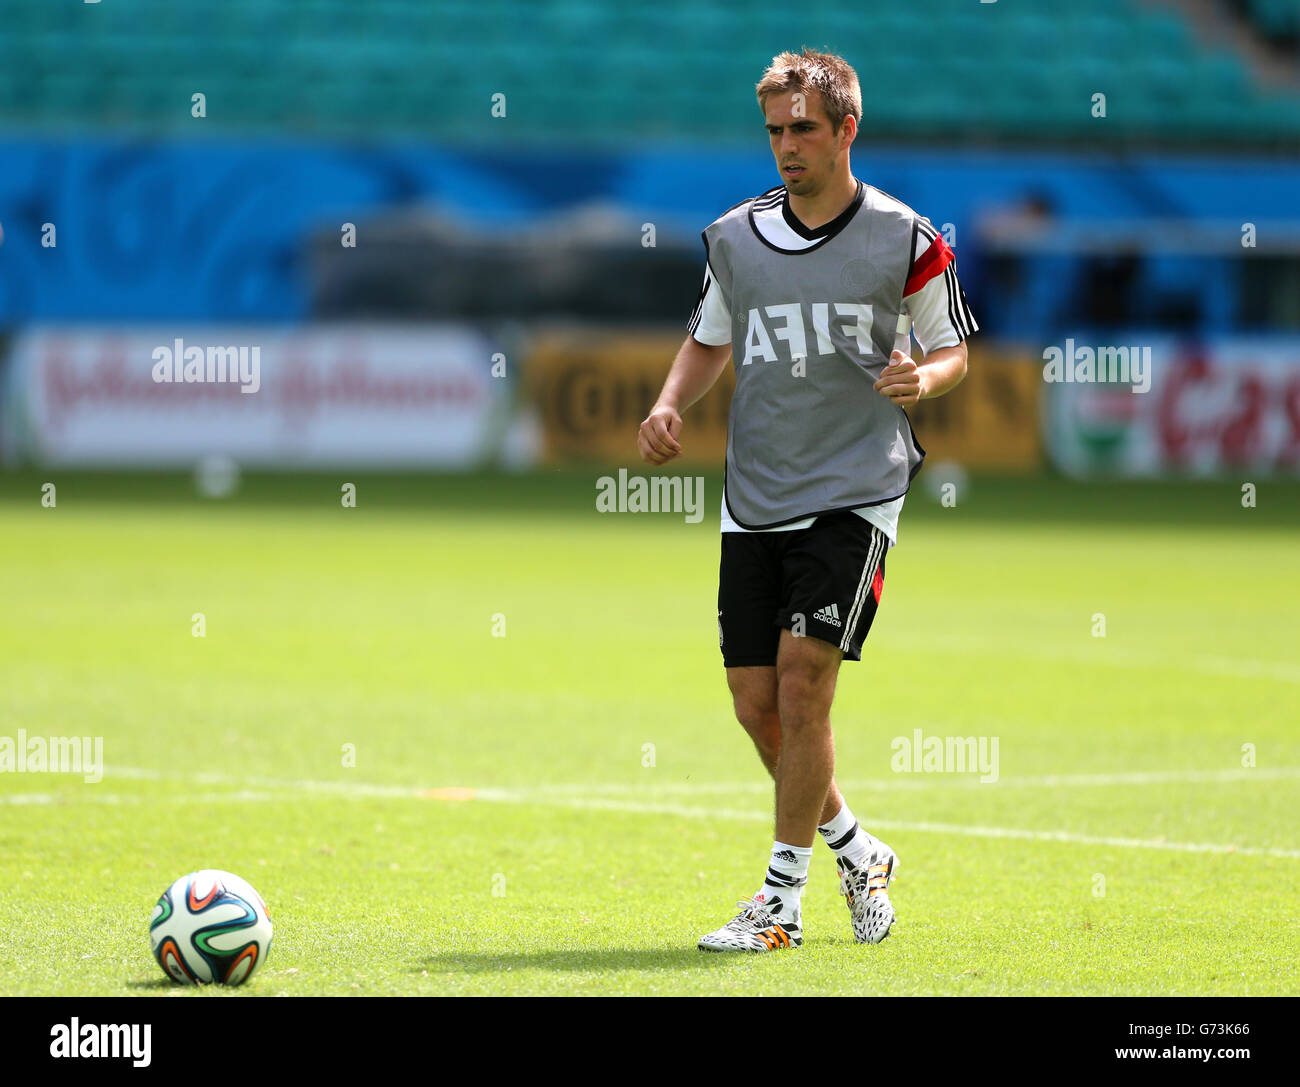 Soccer - FIFA World Cup 2014 - Group G - Germany v Portugal - Germany Training Session - Arena Fonte Nova. Germany's Philipp Lahm during a training session Stock Photo